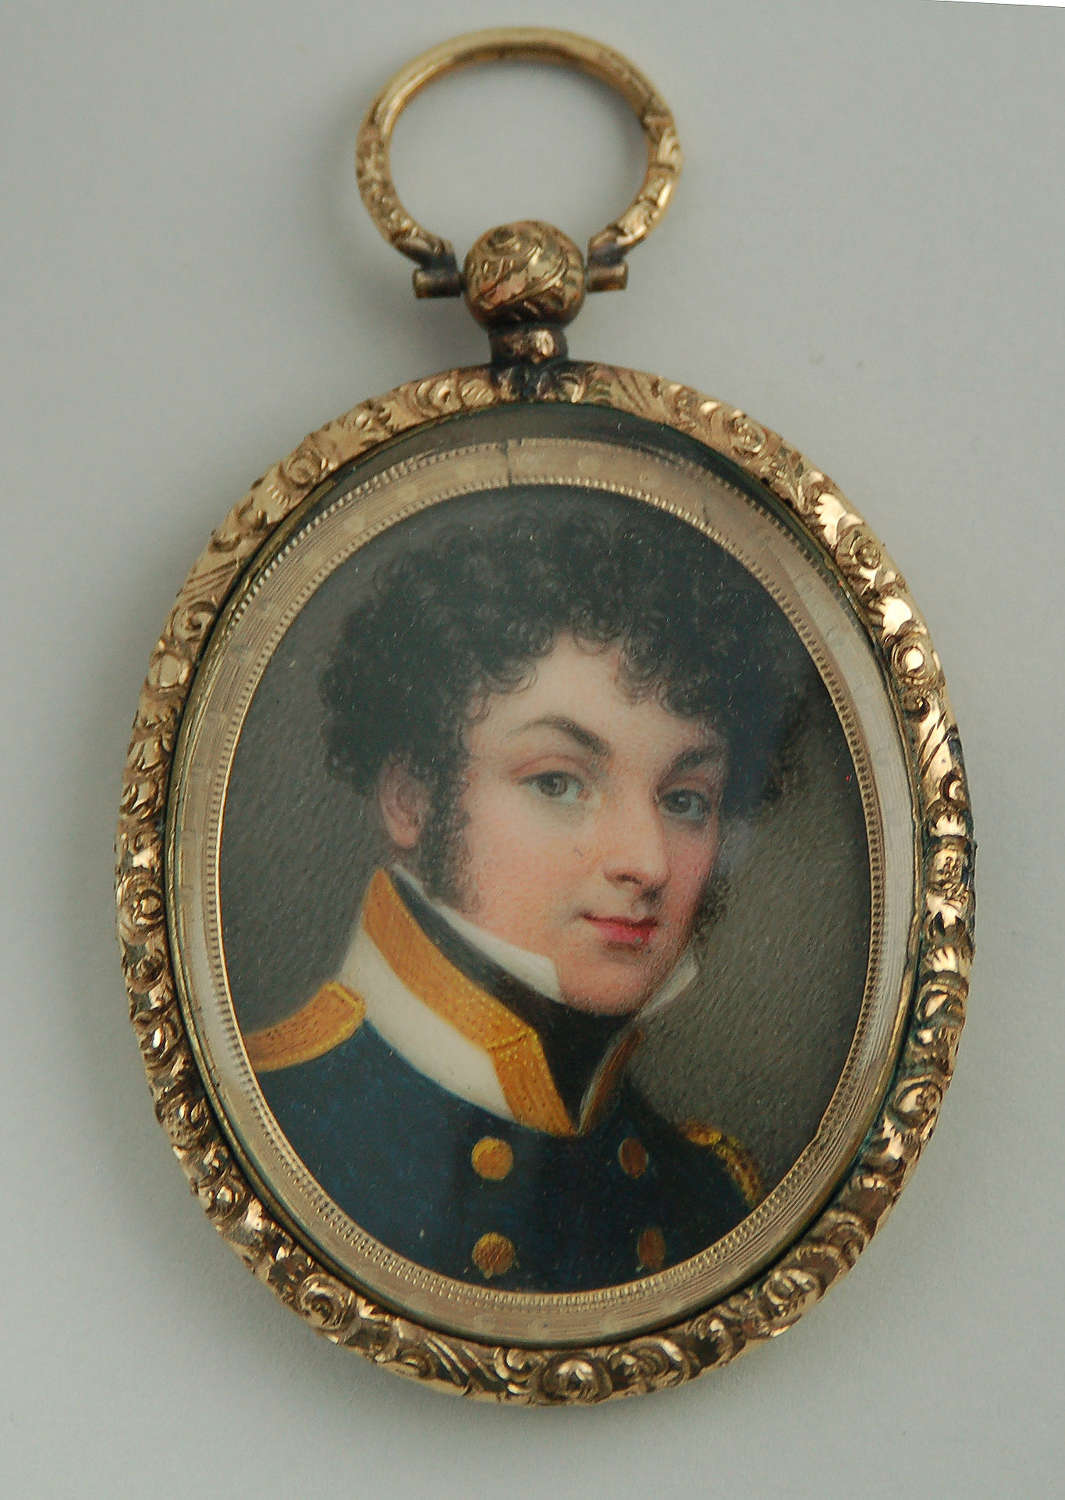 Naval officer by Stump C1825